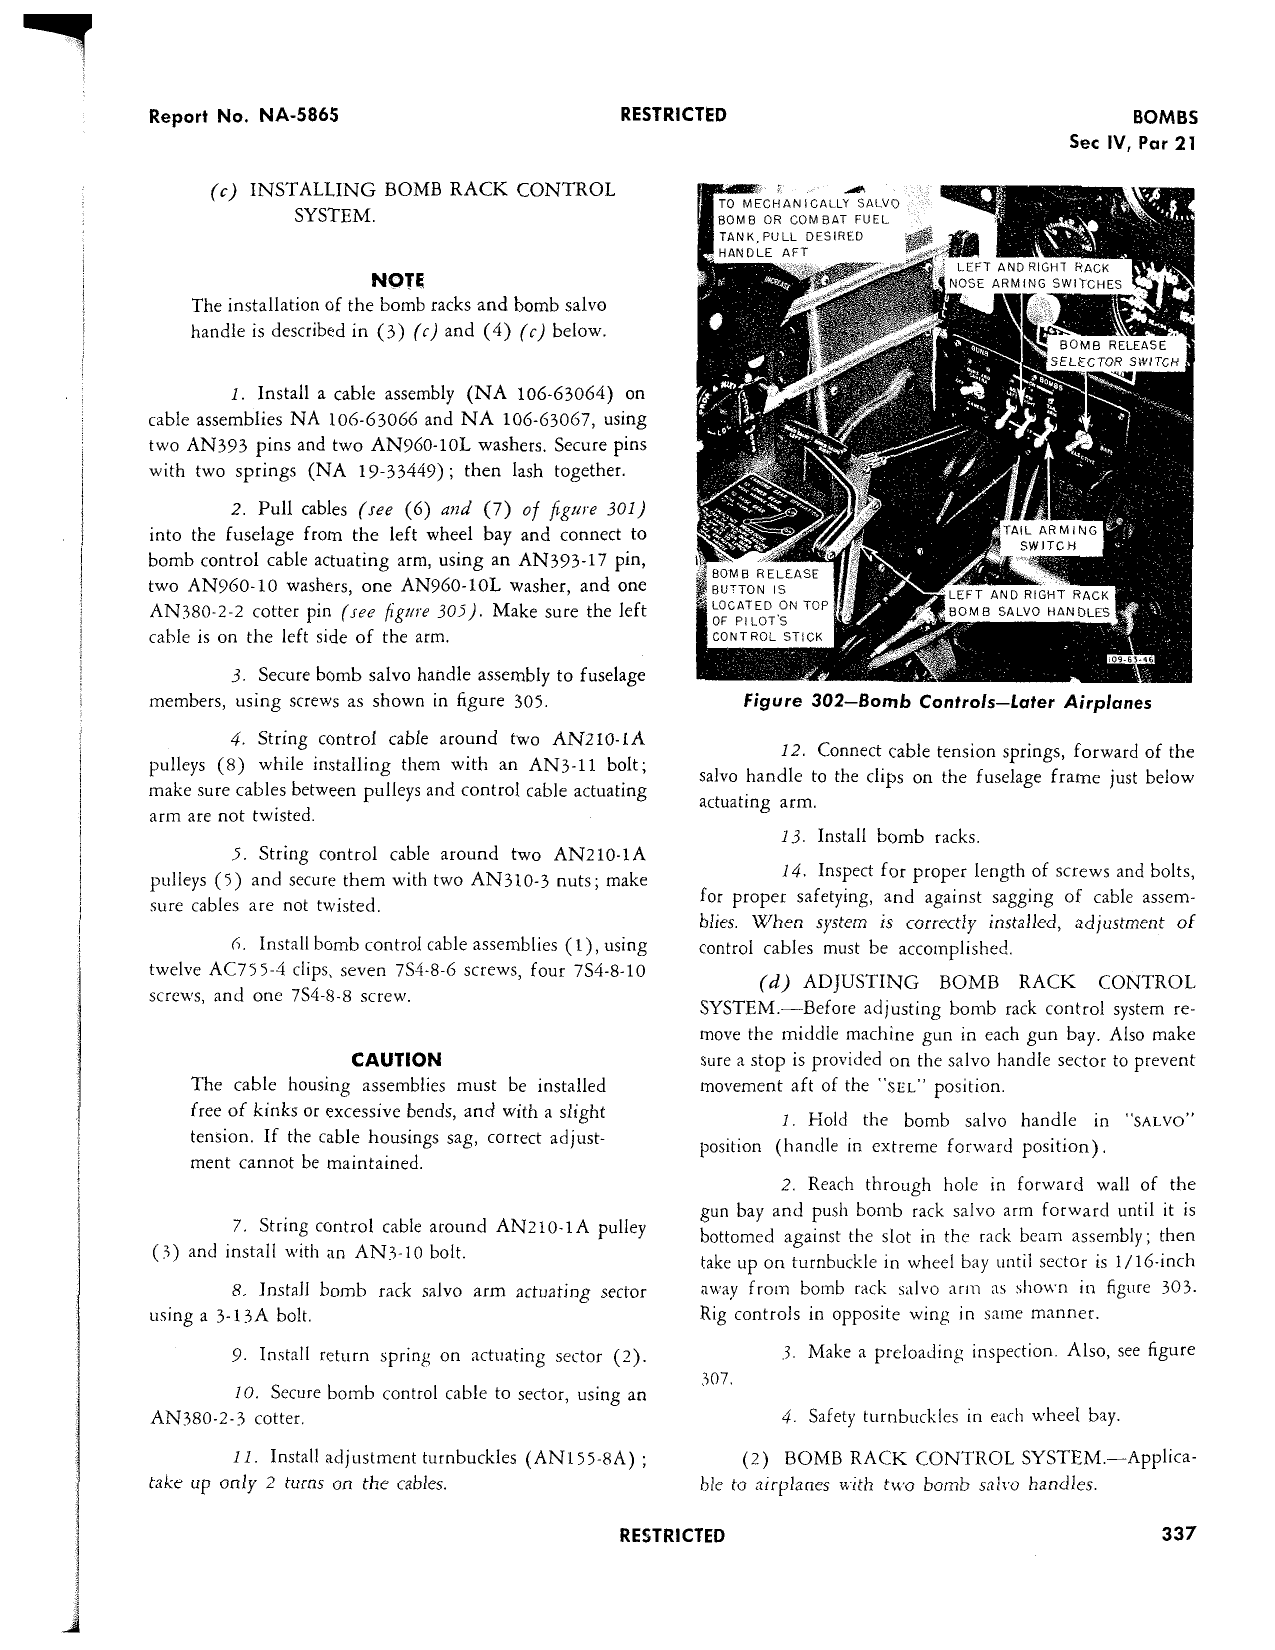 Sample page 341 from AirCorps Library document: Shipment & Erection Manual - P-51D Airplanes